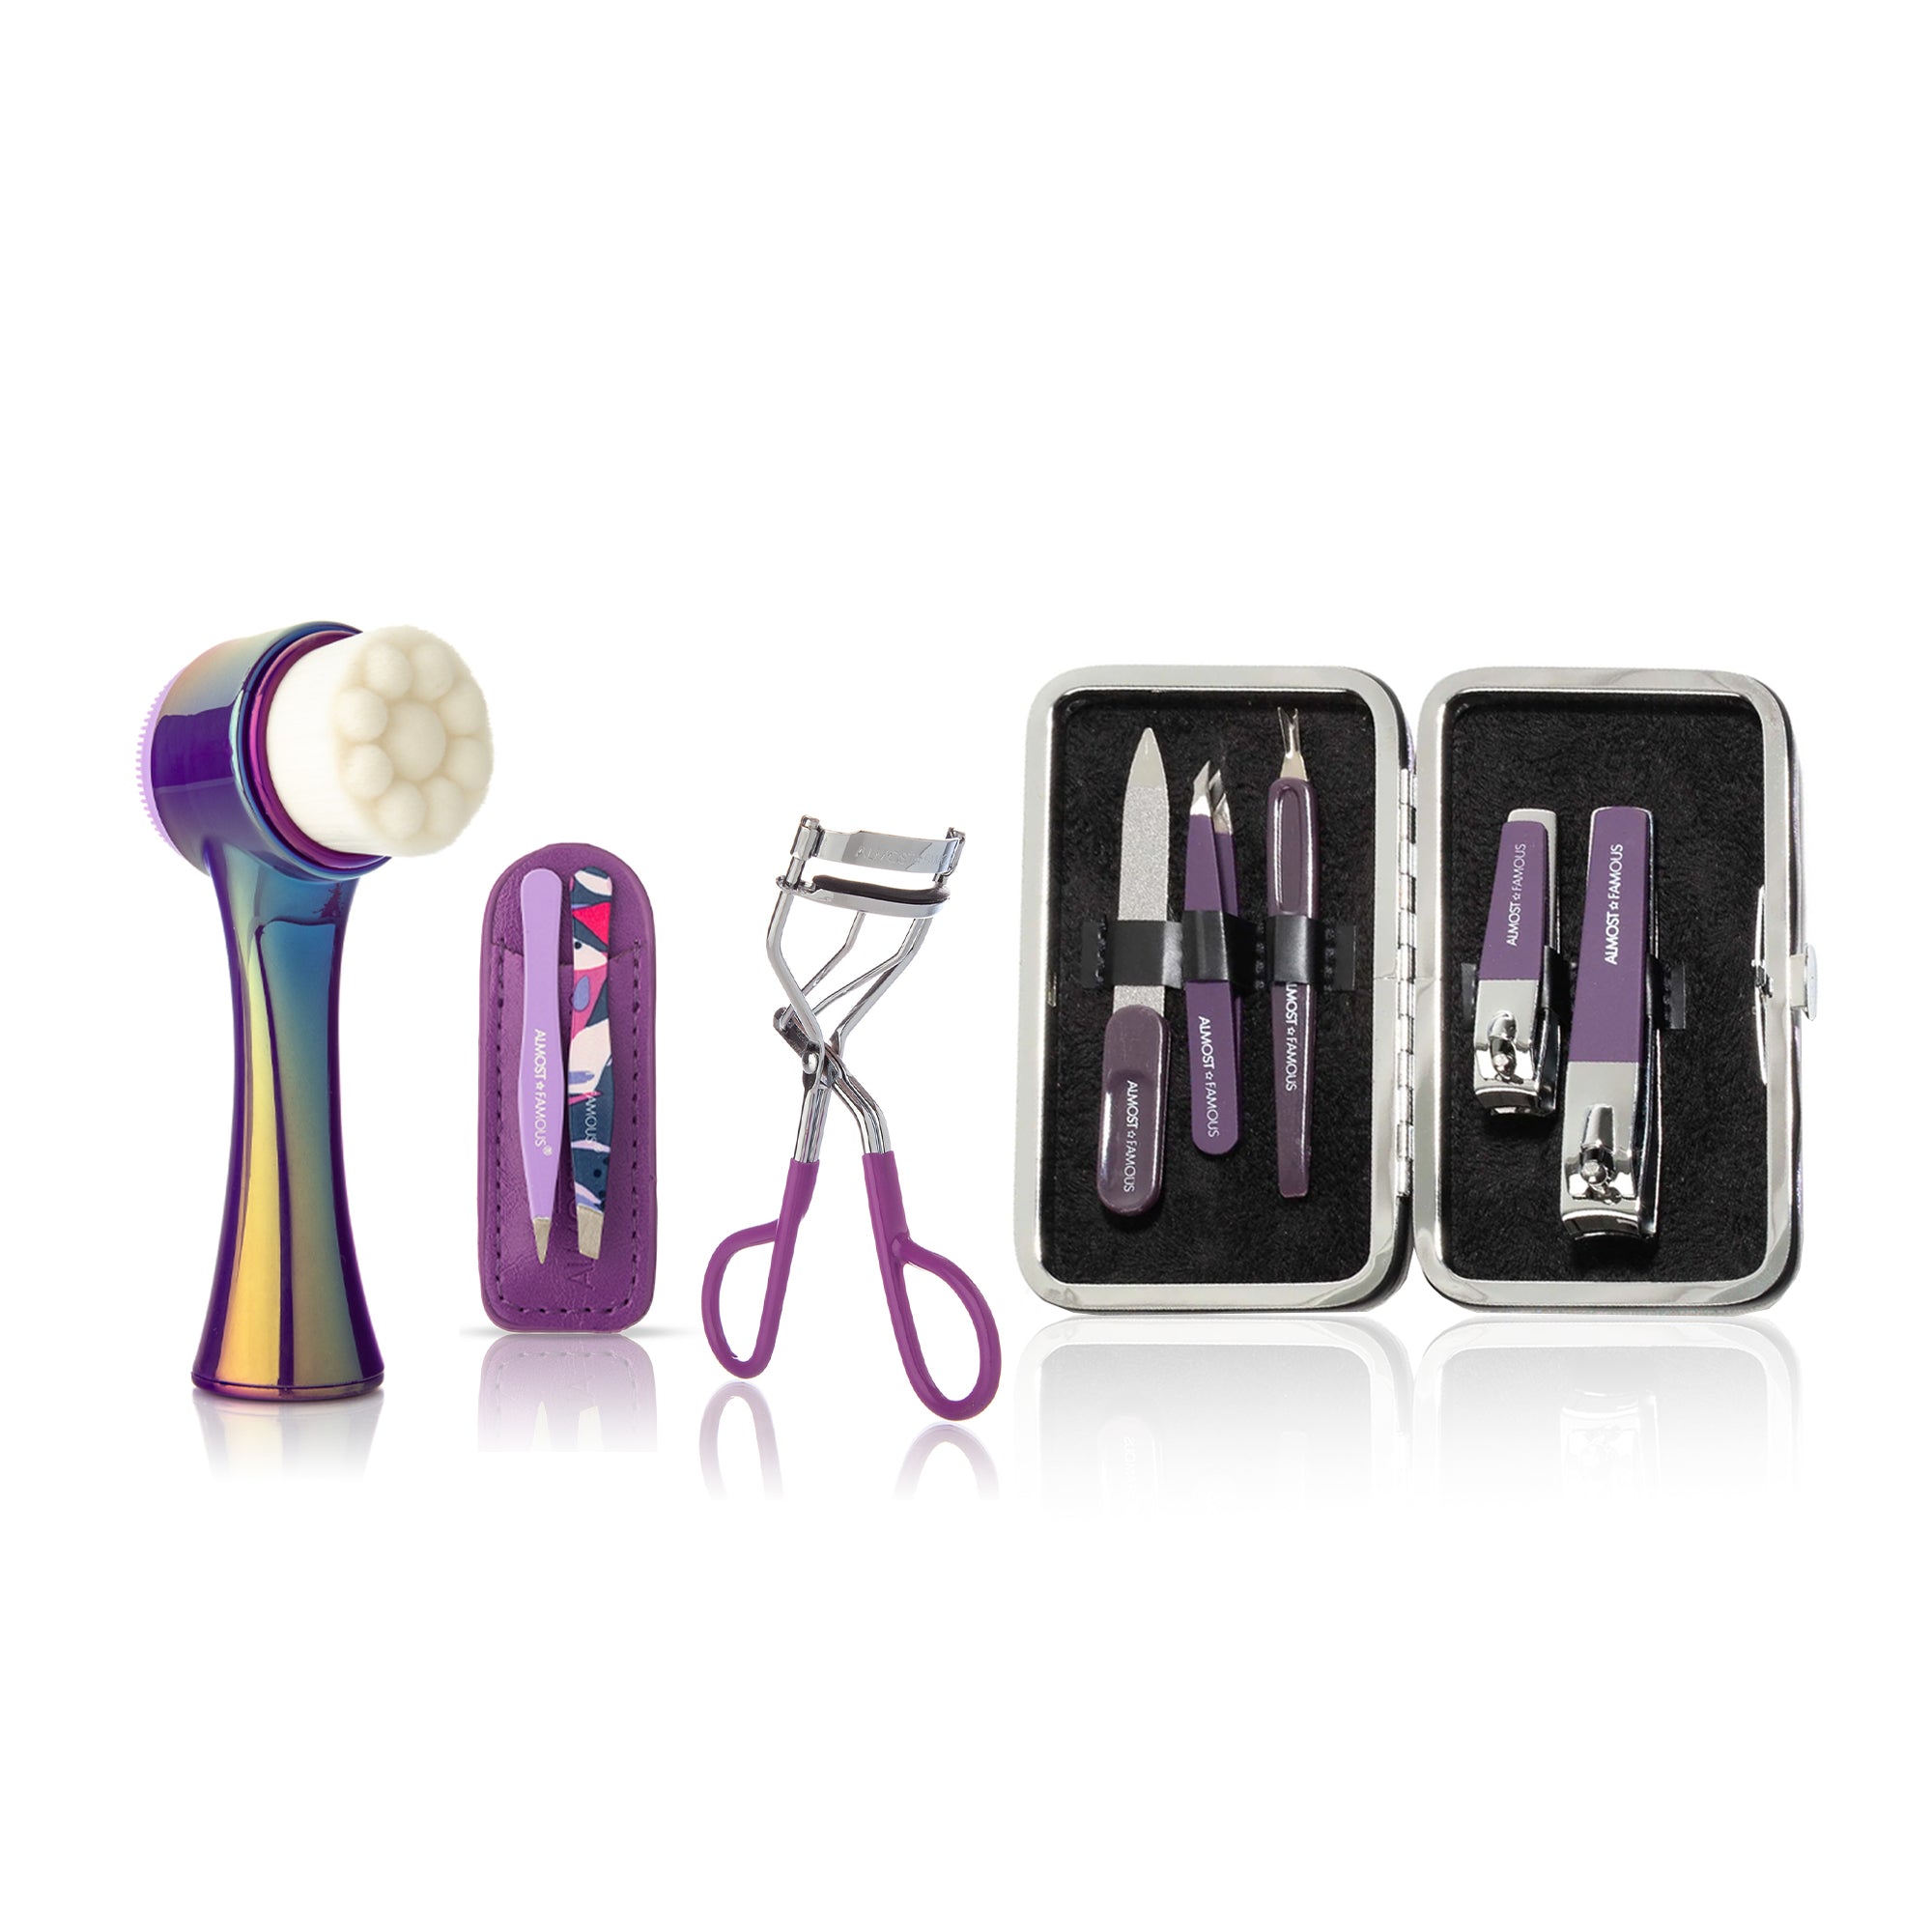 "Best of Beauty" 11pc All-Inclusive Set